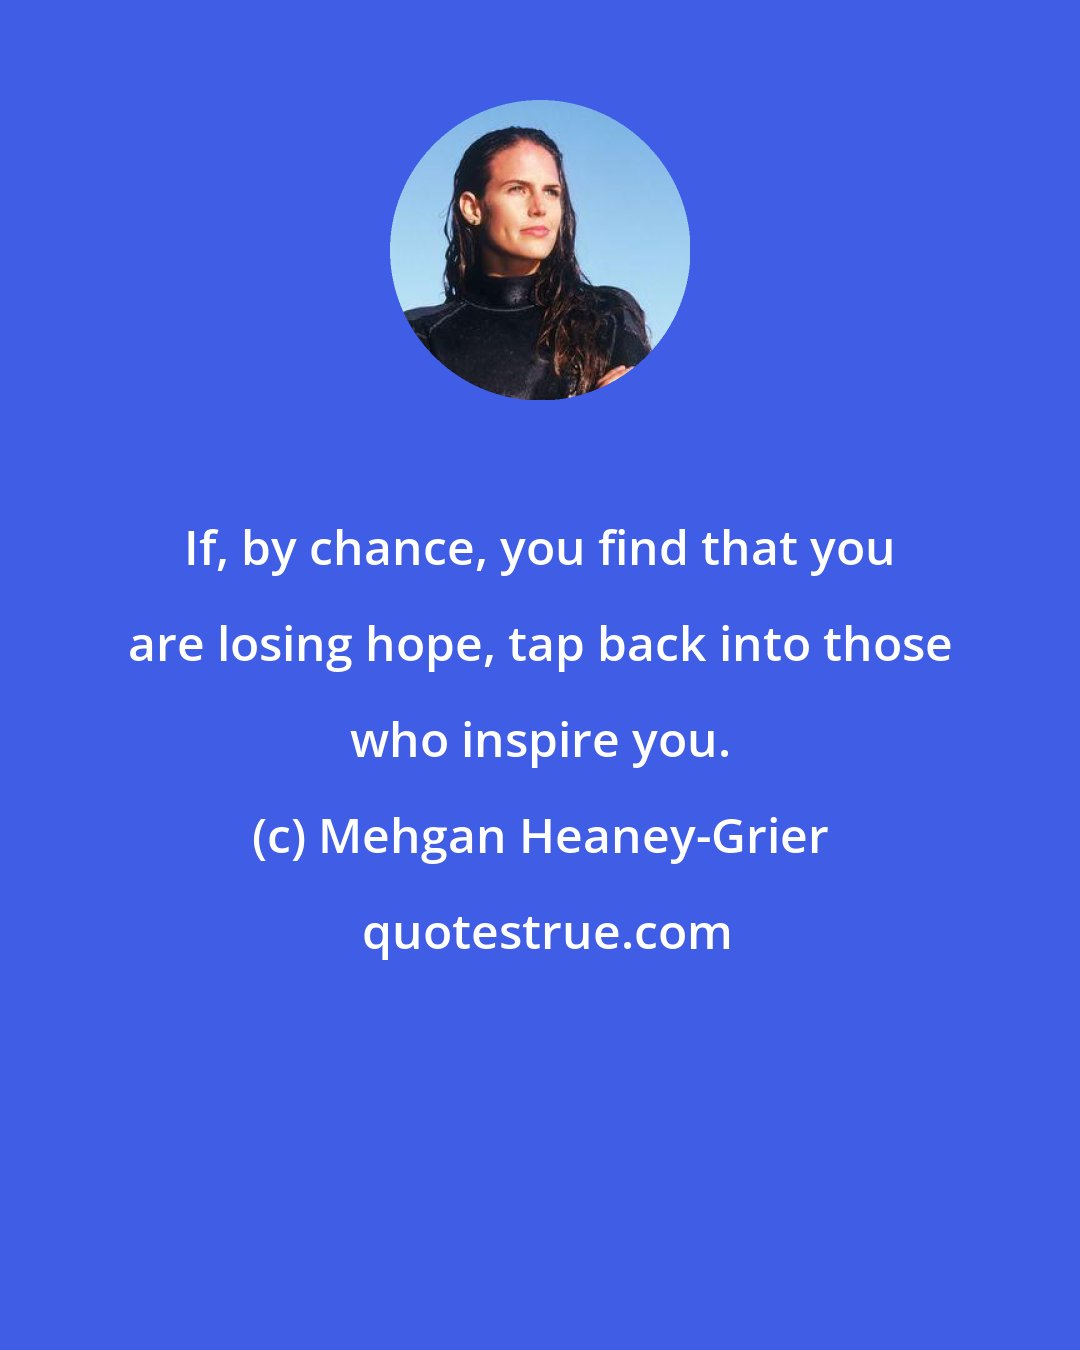 Mehgan Heaney-Grier: If, by chance, you find that you are losing hope, tap back into those who inspire you.